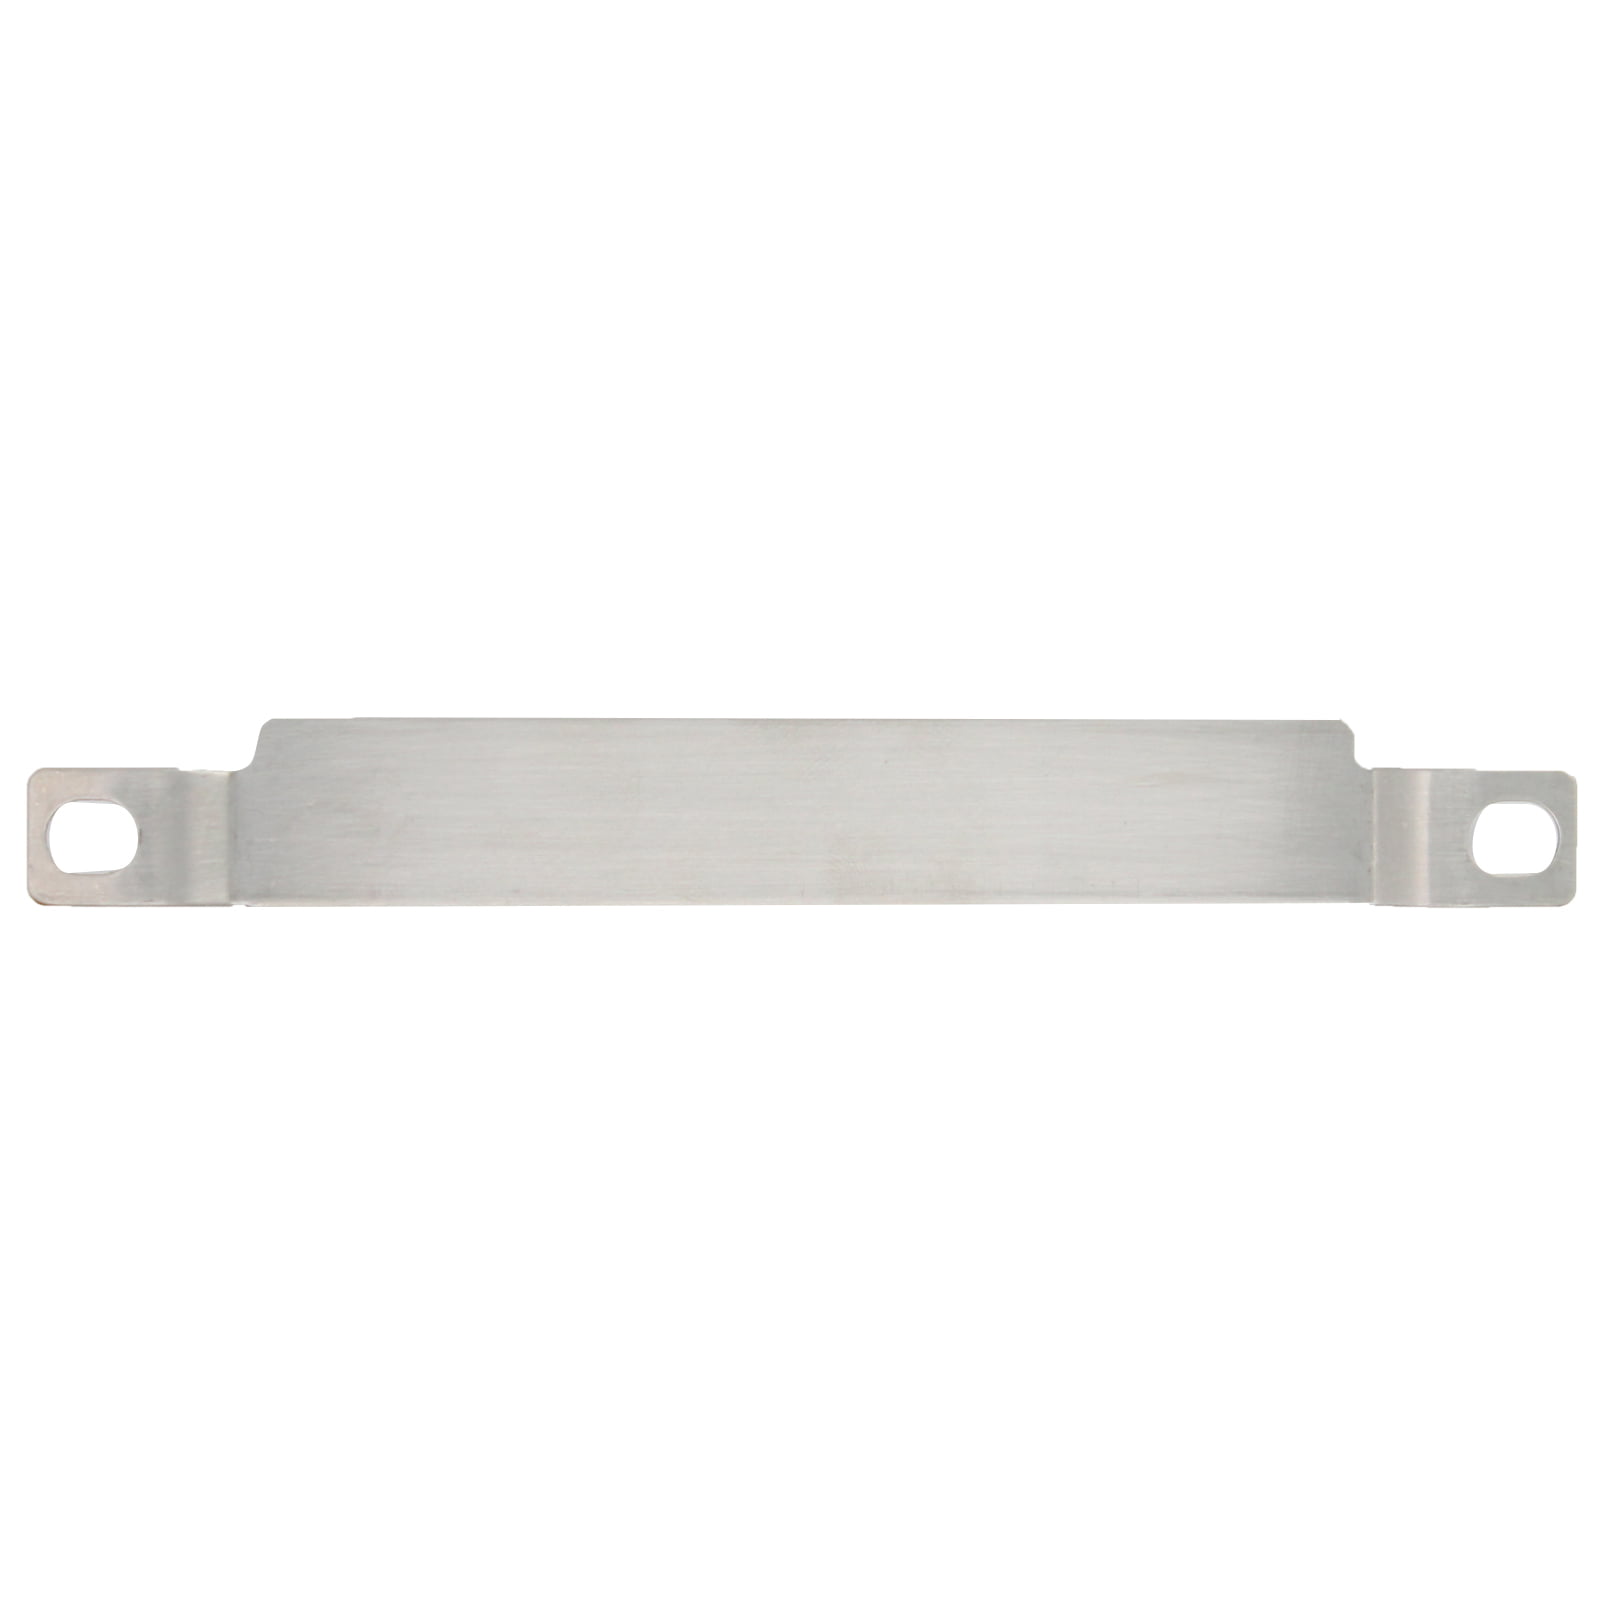 Charbroil 463251512 Stainless Steel Cross-Over Burner Replacement Part 